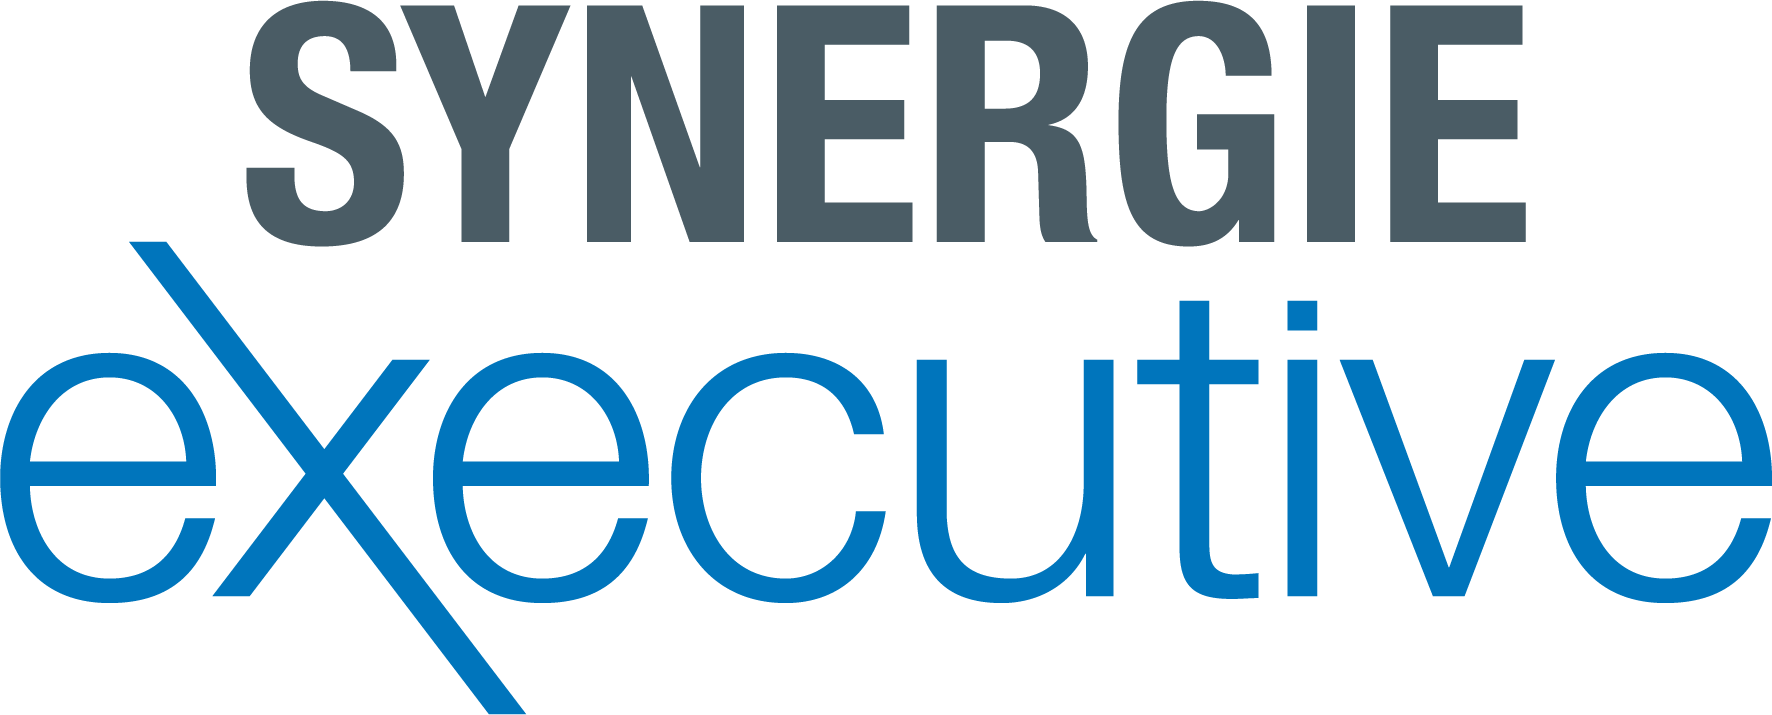 Synergie Executive